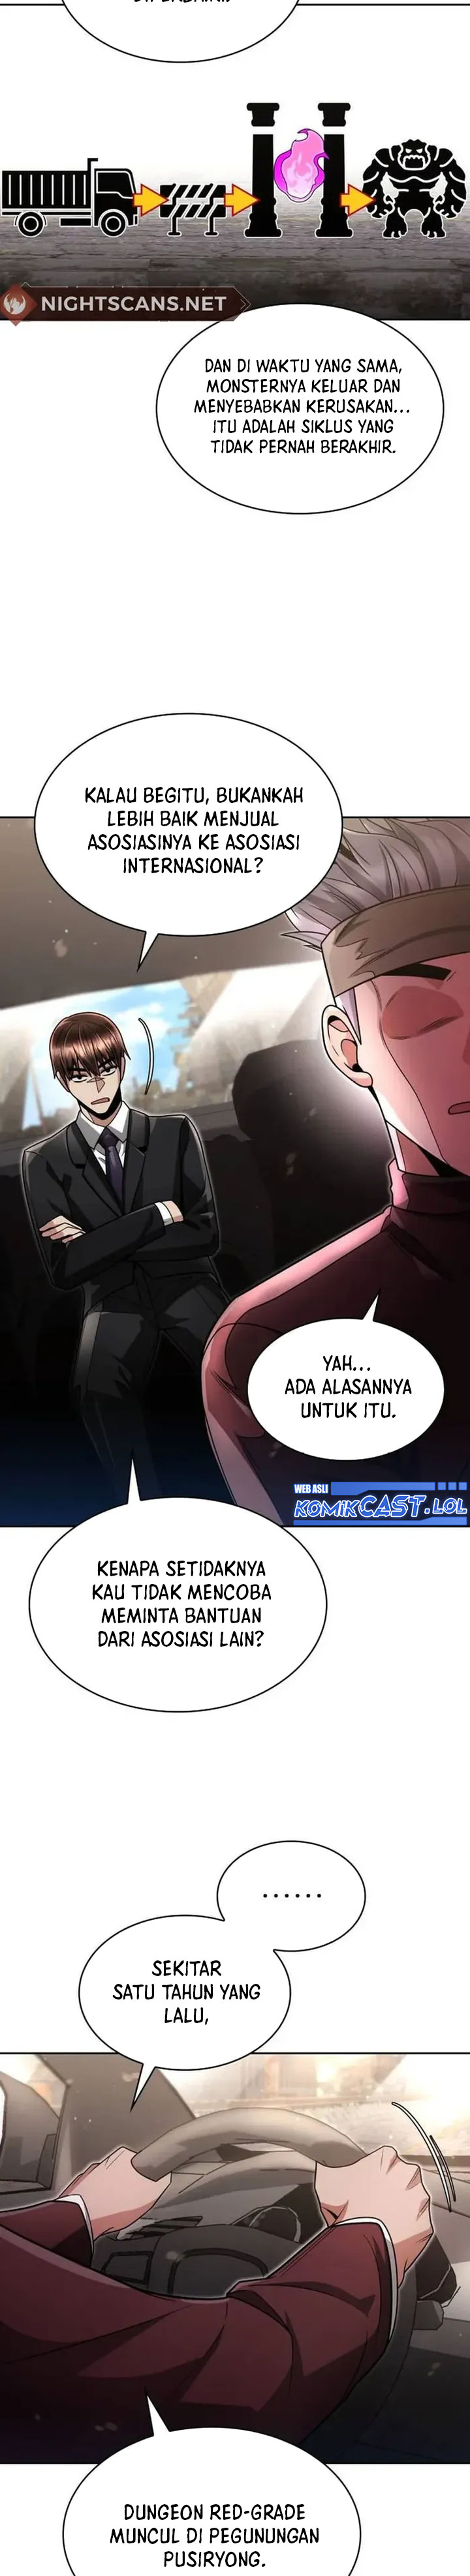 Dilarang COPAS - situs resmi www.mangacanblog.com - Komik clever cleaning life of the returned genius hunter 058 - chapter 58 59 Indonesia clever cleaning life of the returned genius hunter 058 - chapter 58 Terbaru 15|Baca Manga Komik Indonesia|Mangacan